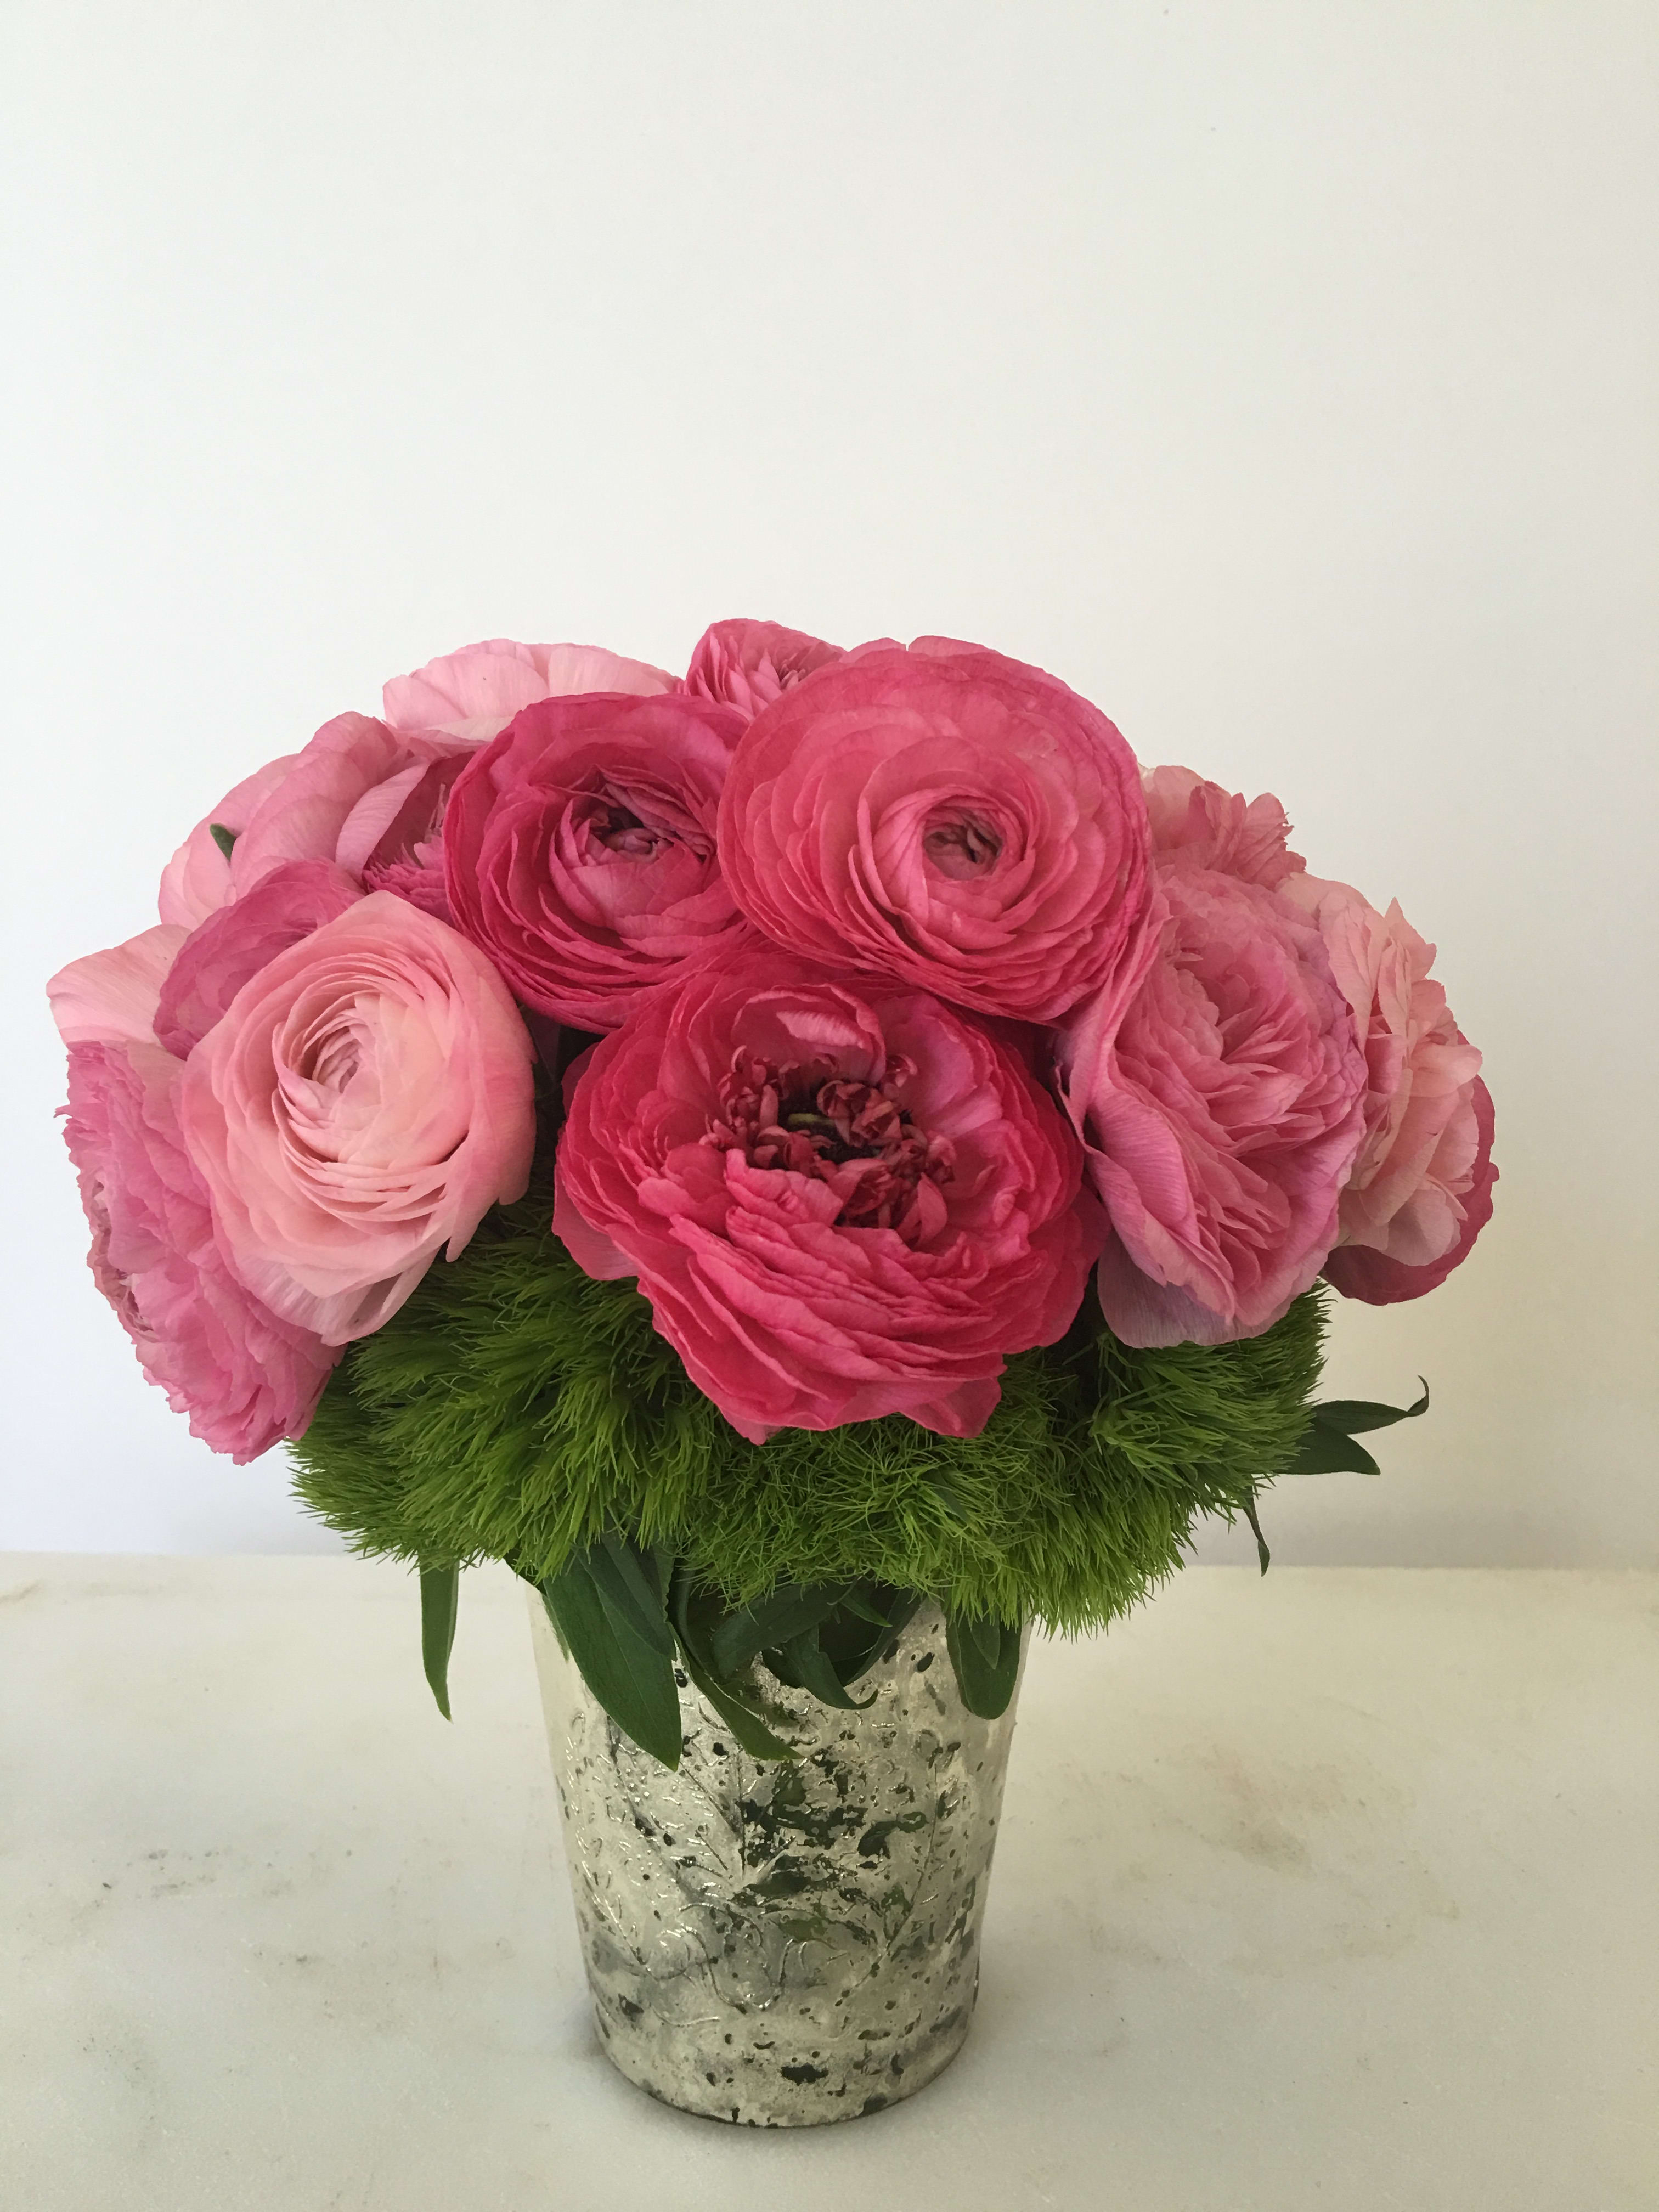 Pretty in pink - ranunculos never be so beautiful, our master designer always make sure every arrangement is put together with elegance and perfection